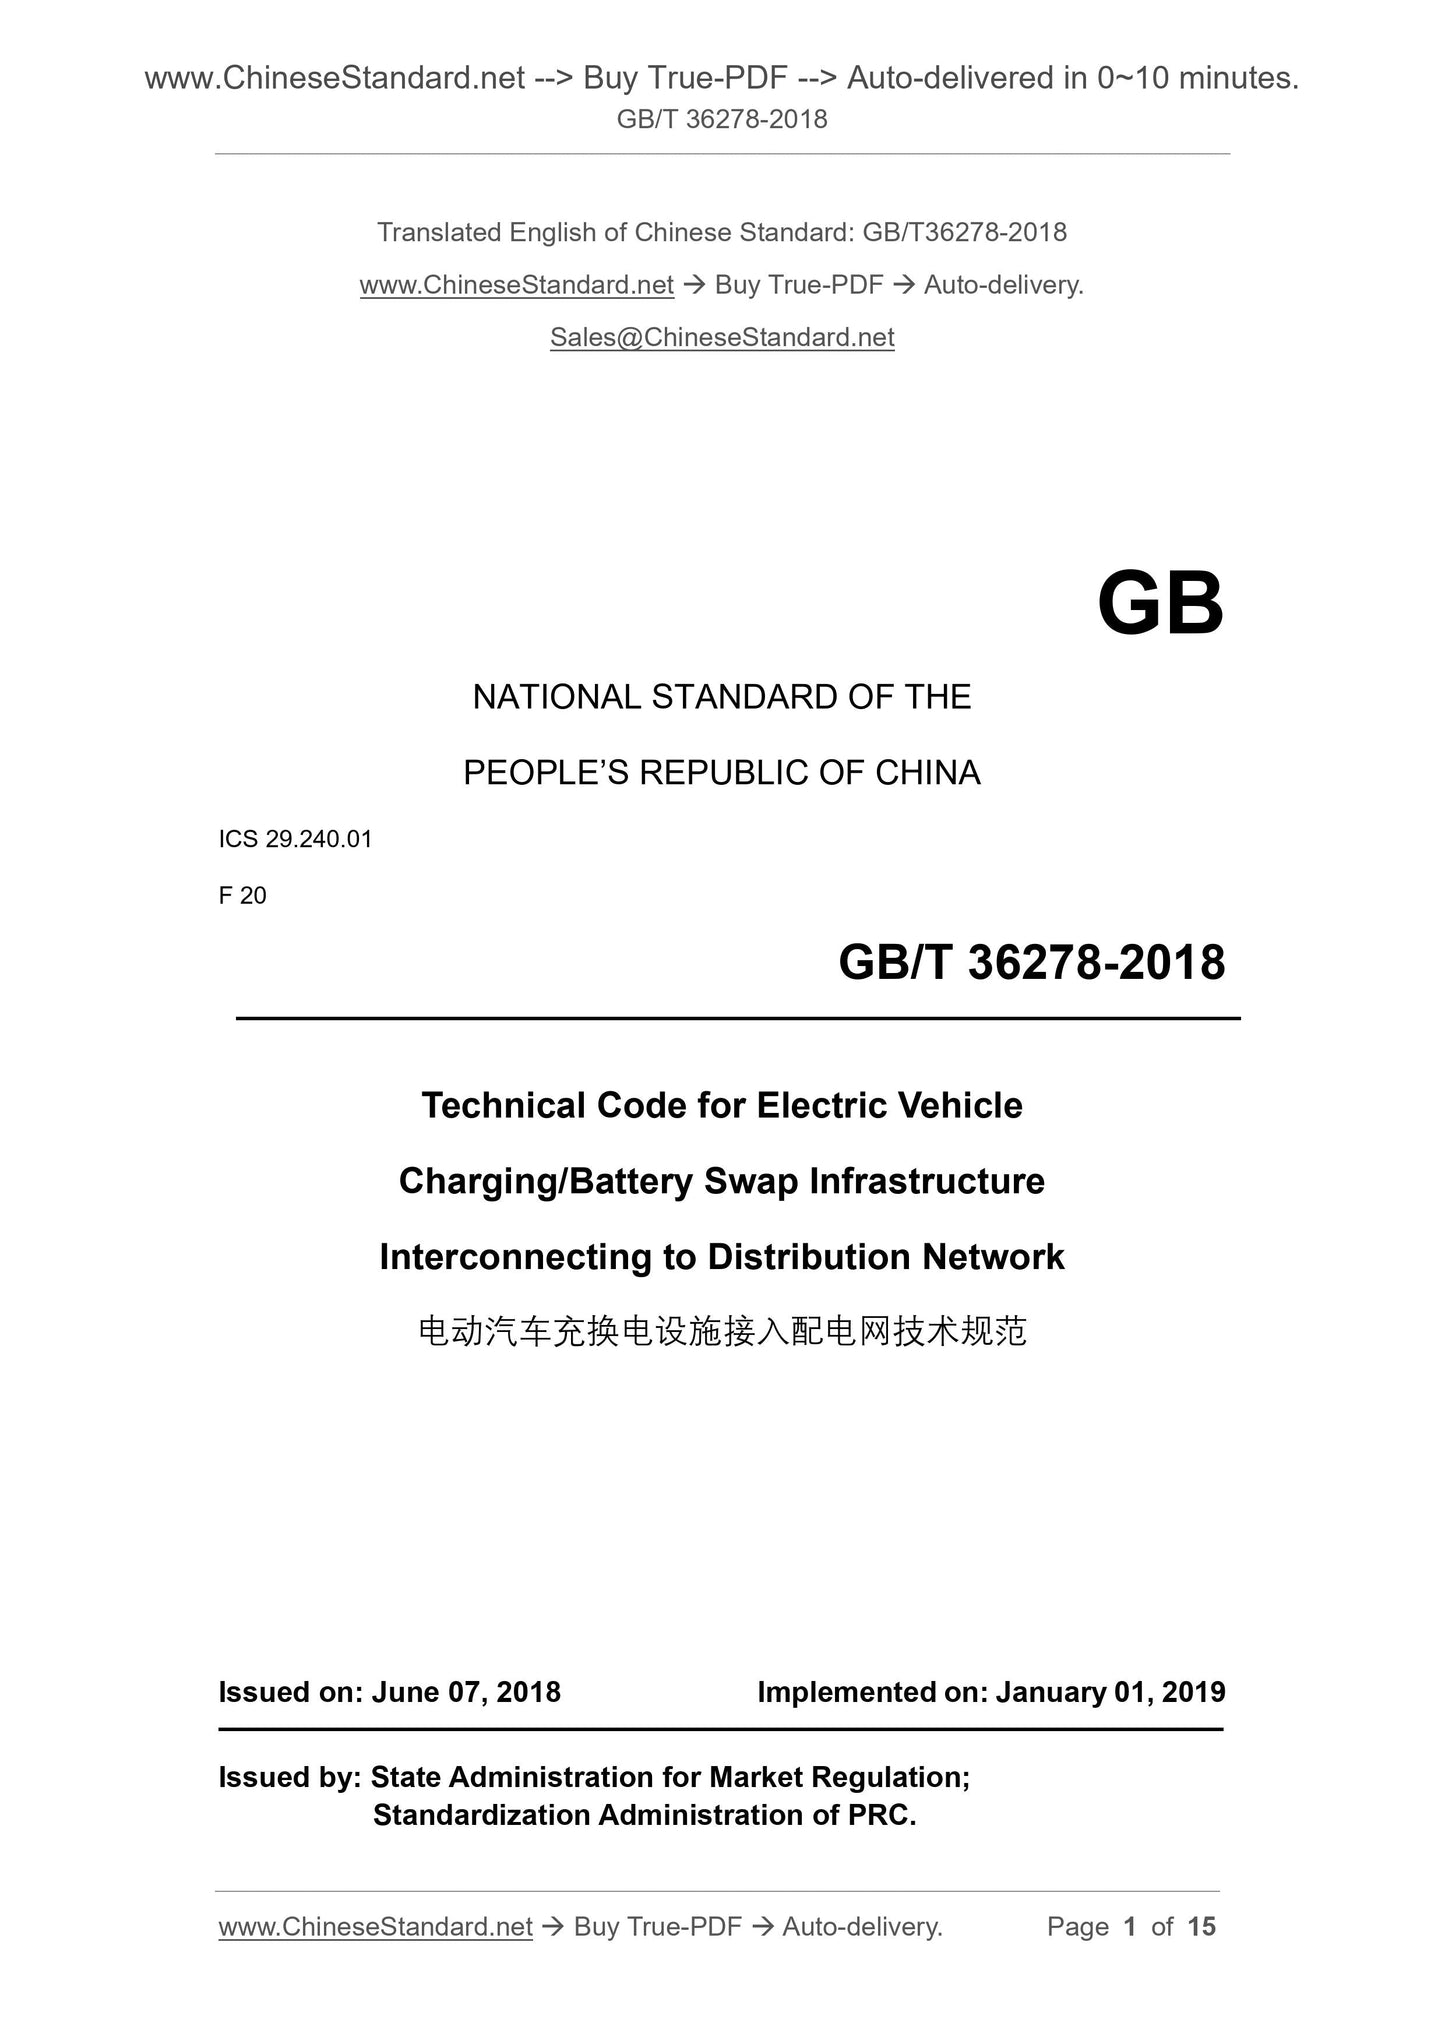 GB/T 36278-2018 Page 1